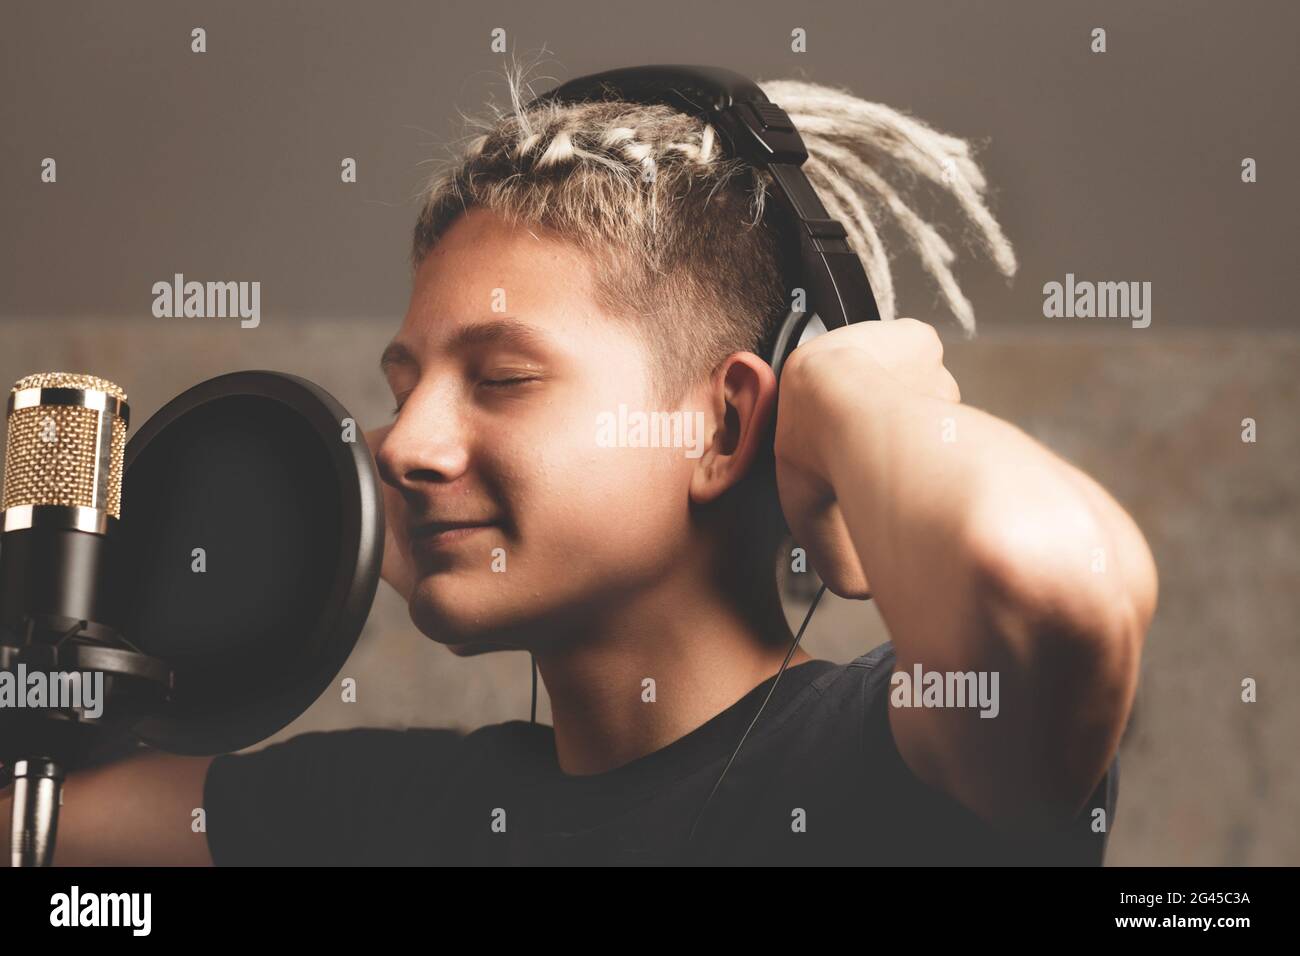 Stylish positive guy with dreadlocks is recording a song in the studio. A young attractive singer in black studio headphones stands in front of a micr Stock Photo